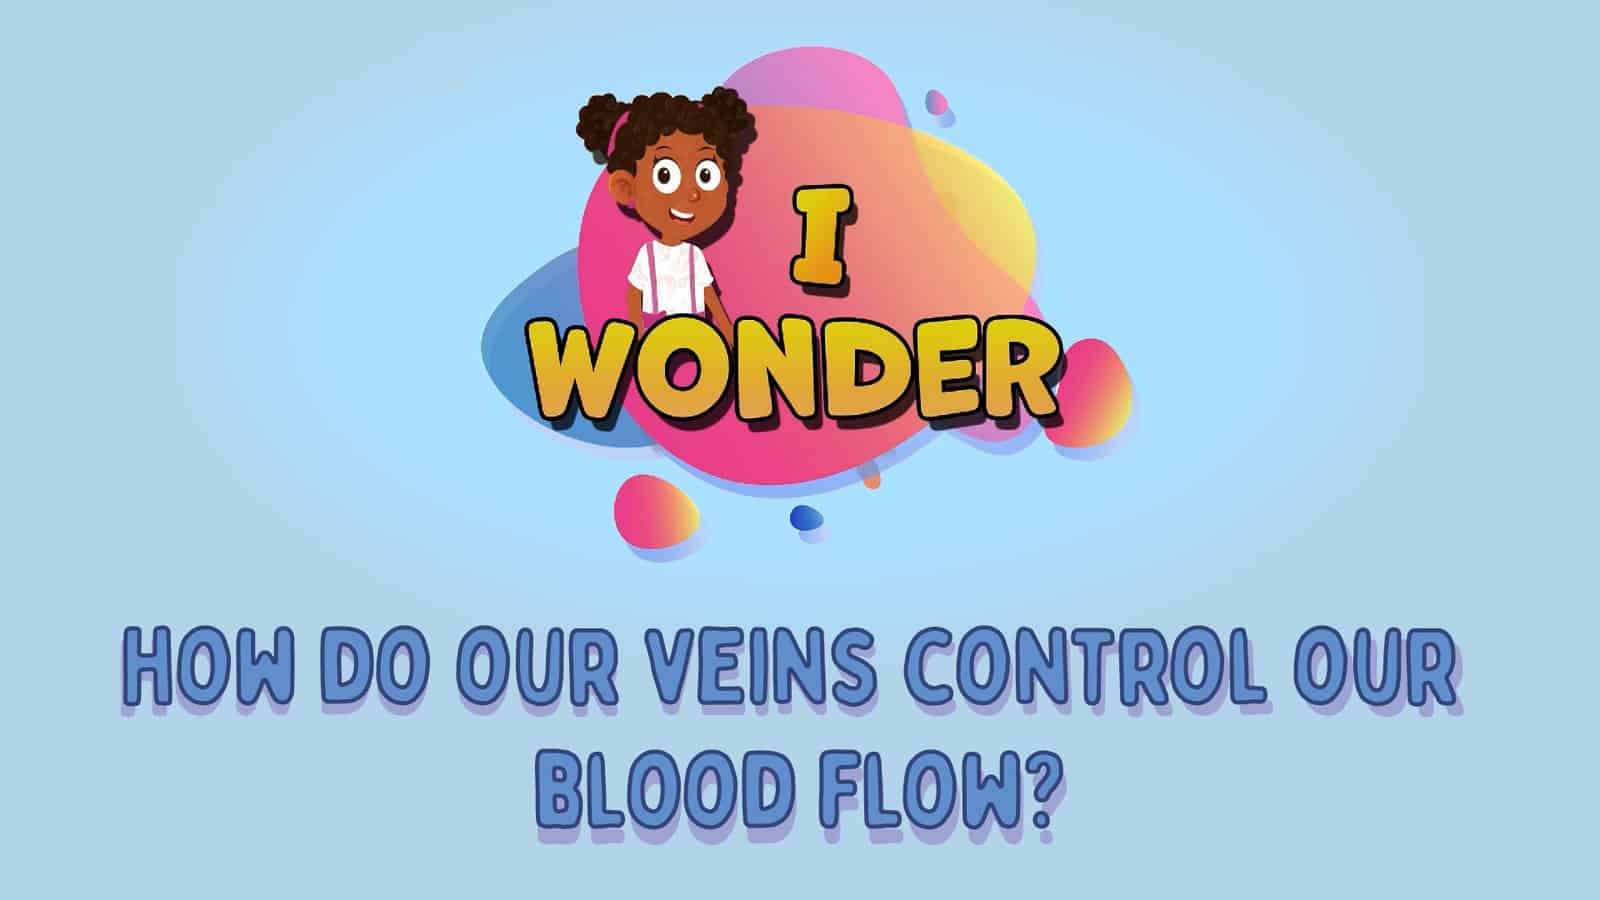 How Do Our Veins Control Our Blood Flow?